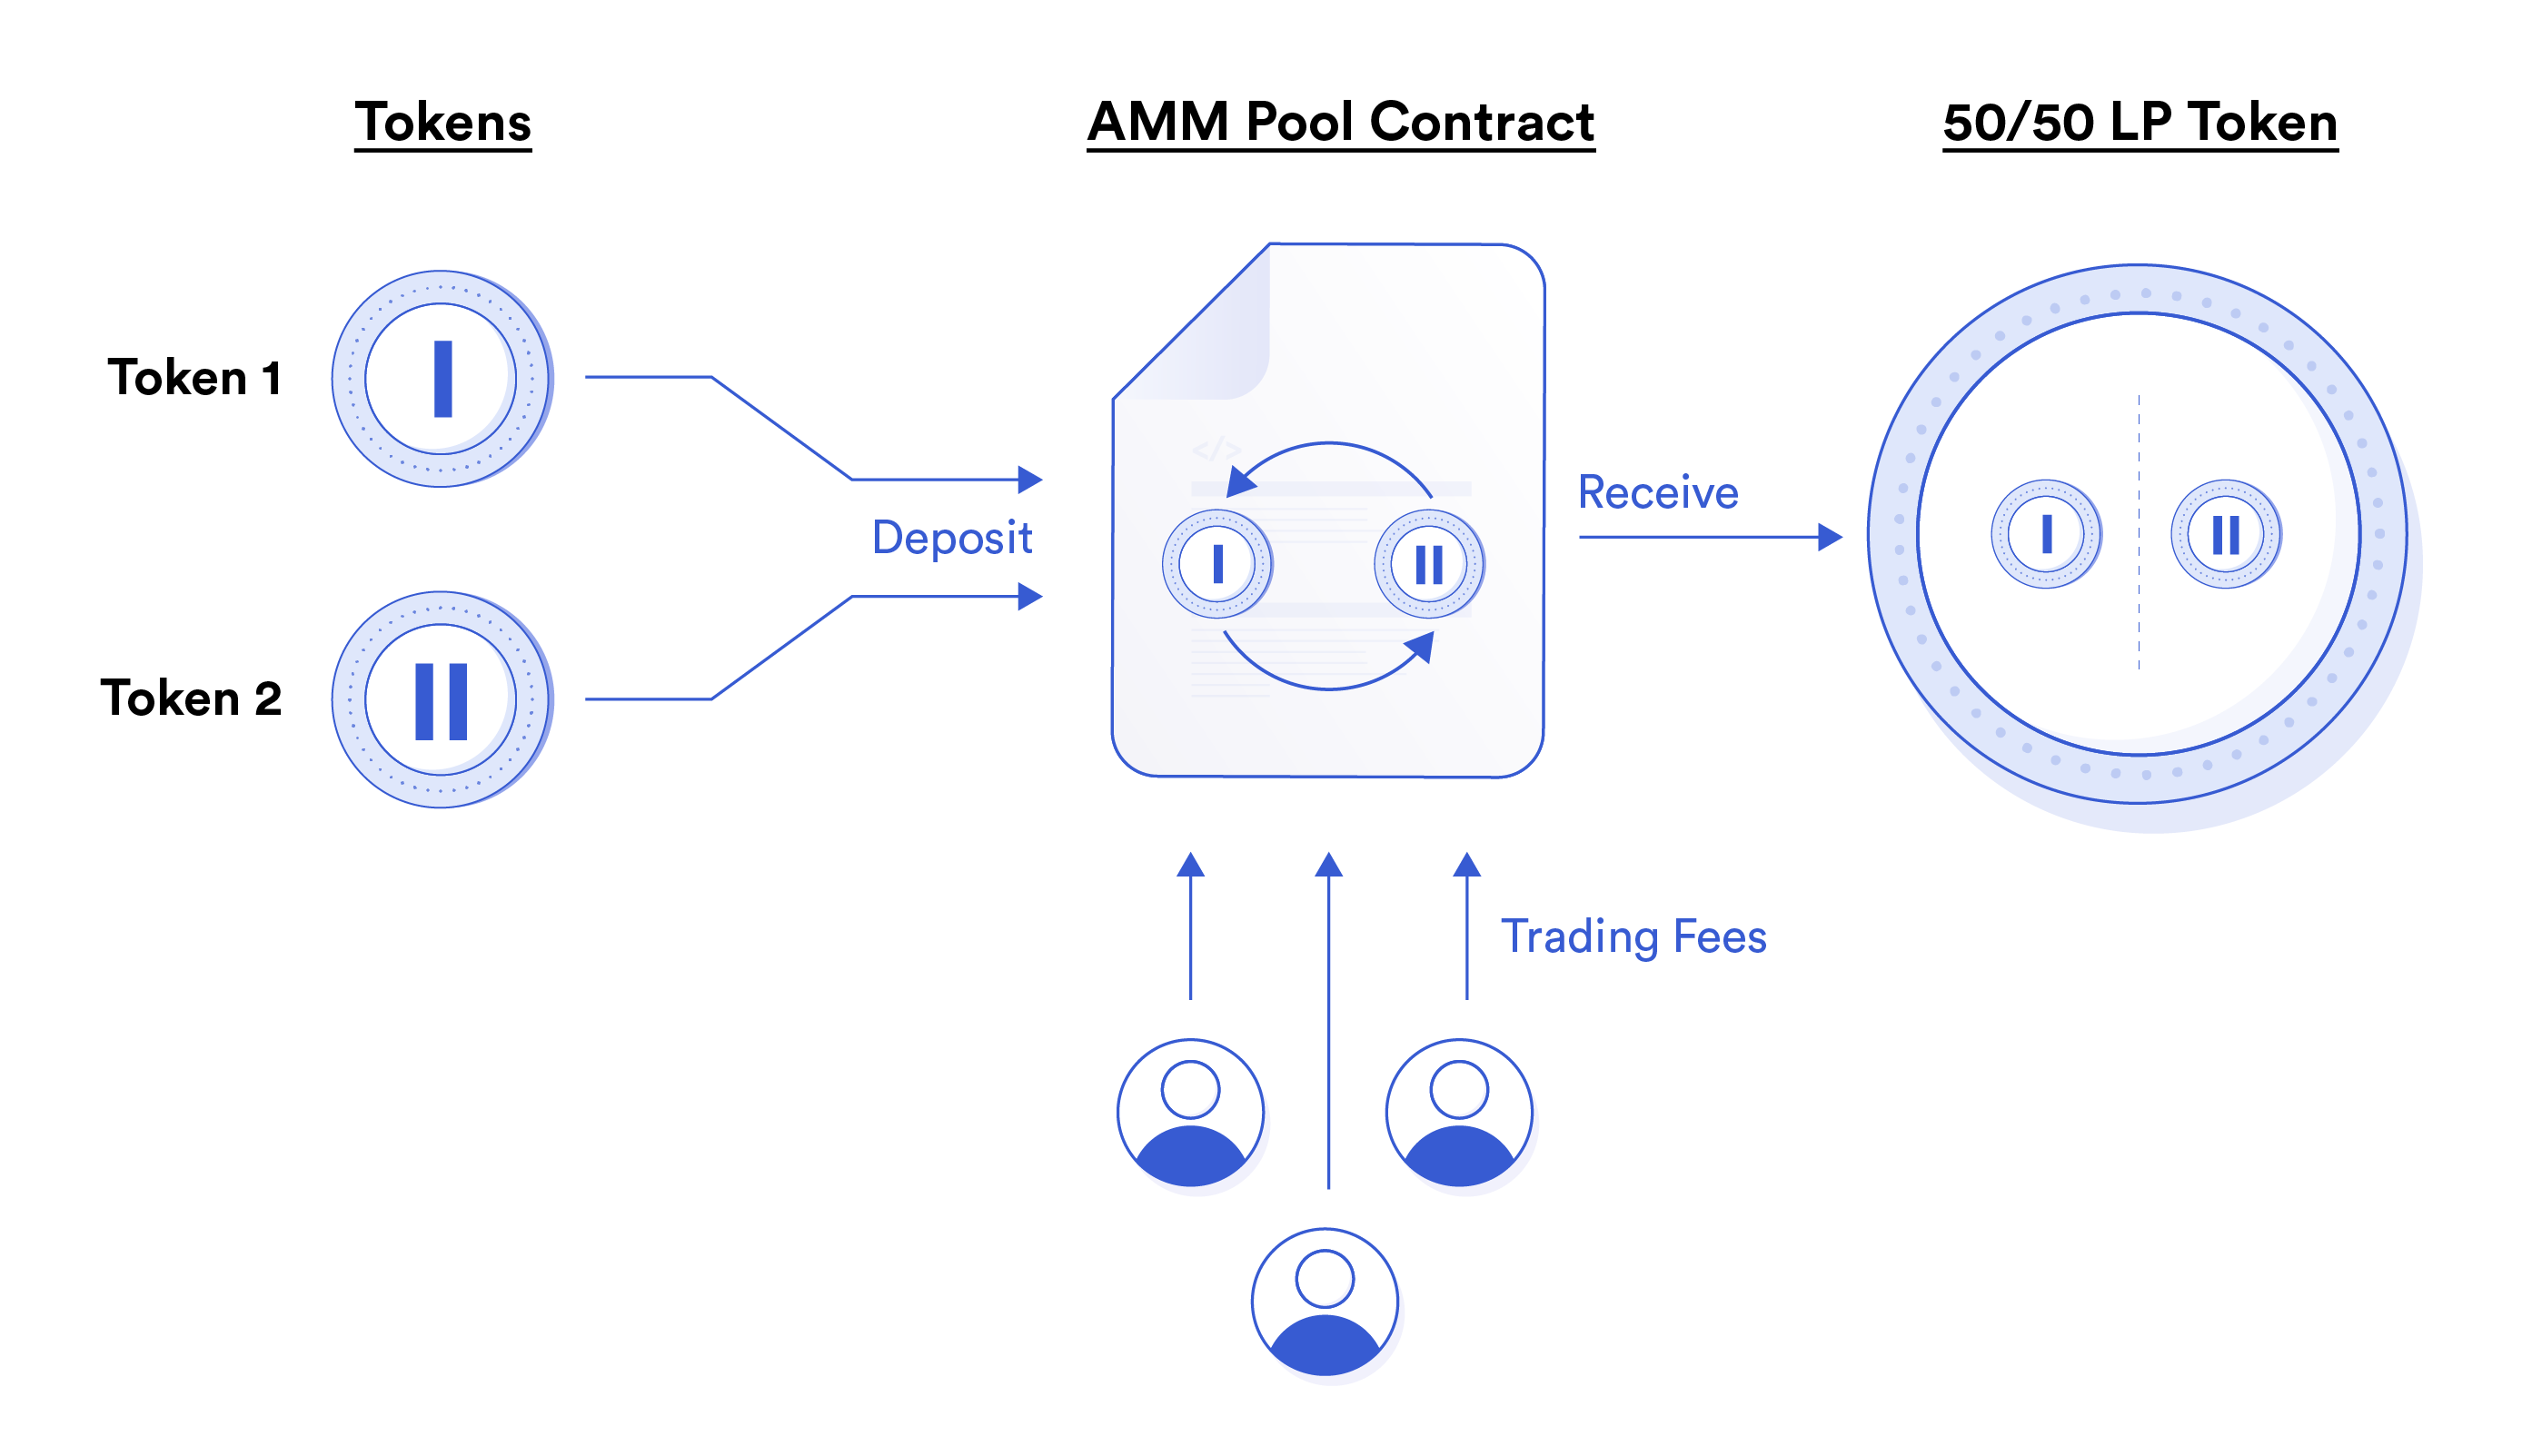 Image source: https://azcoinnews.com/chainlink-defi-2-0-and-liquidity-incentivization.html